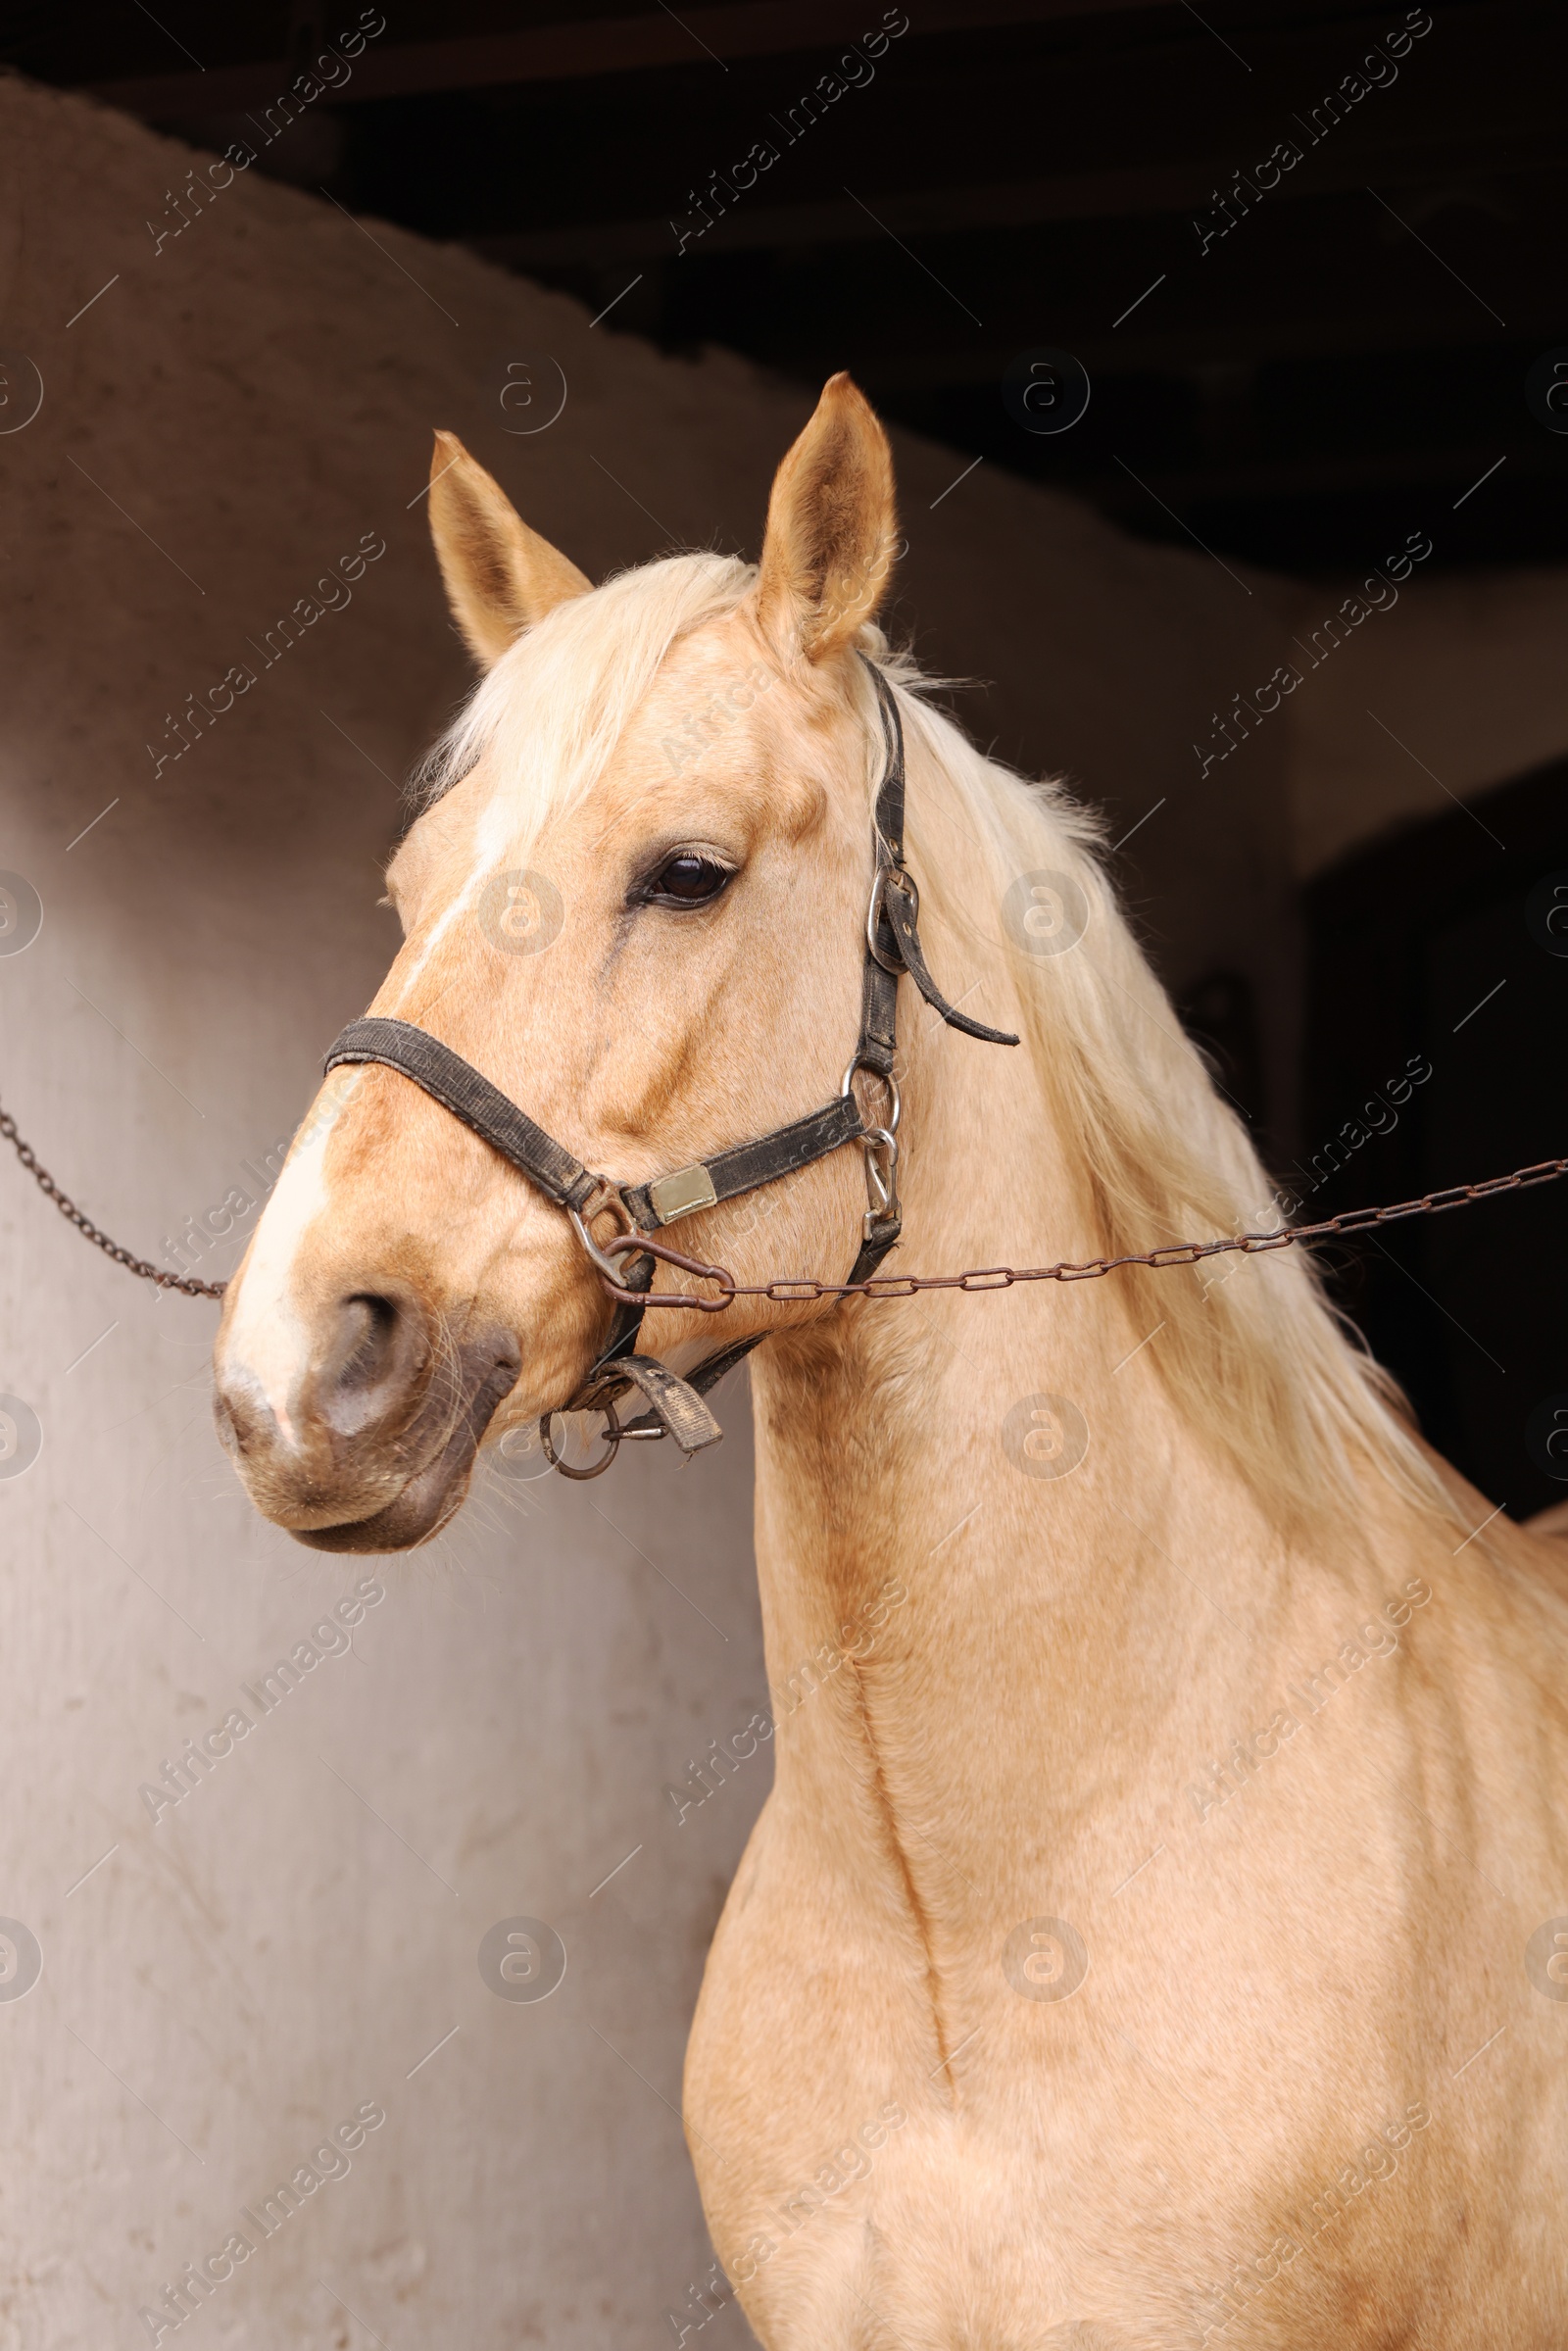 Photo of Adorable horse with bridles in stable. Lovely domesticated pet